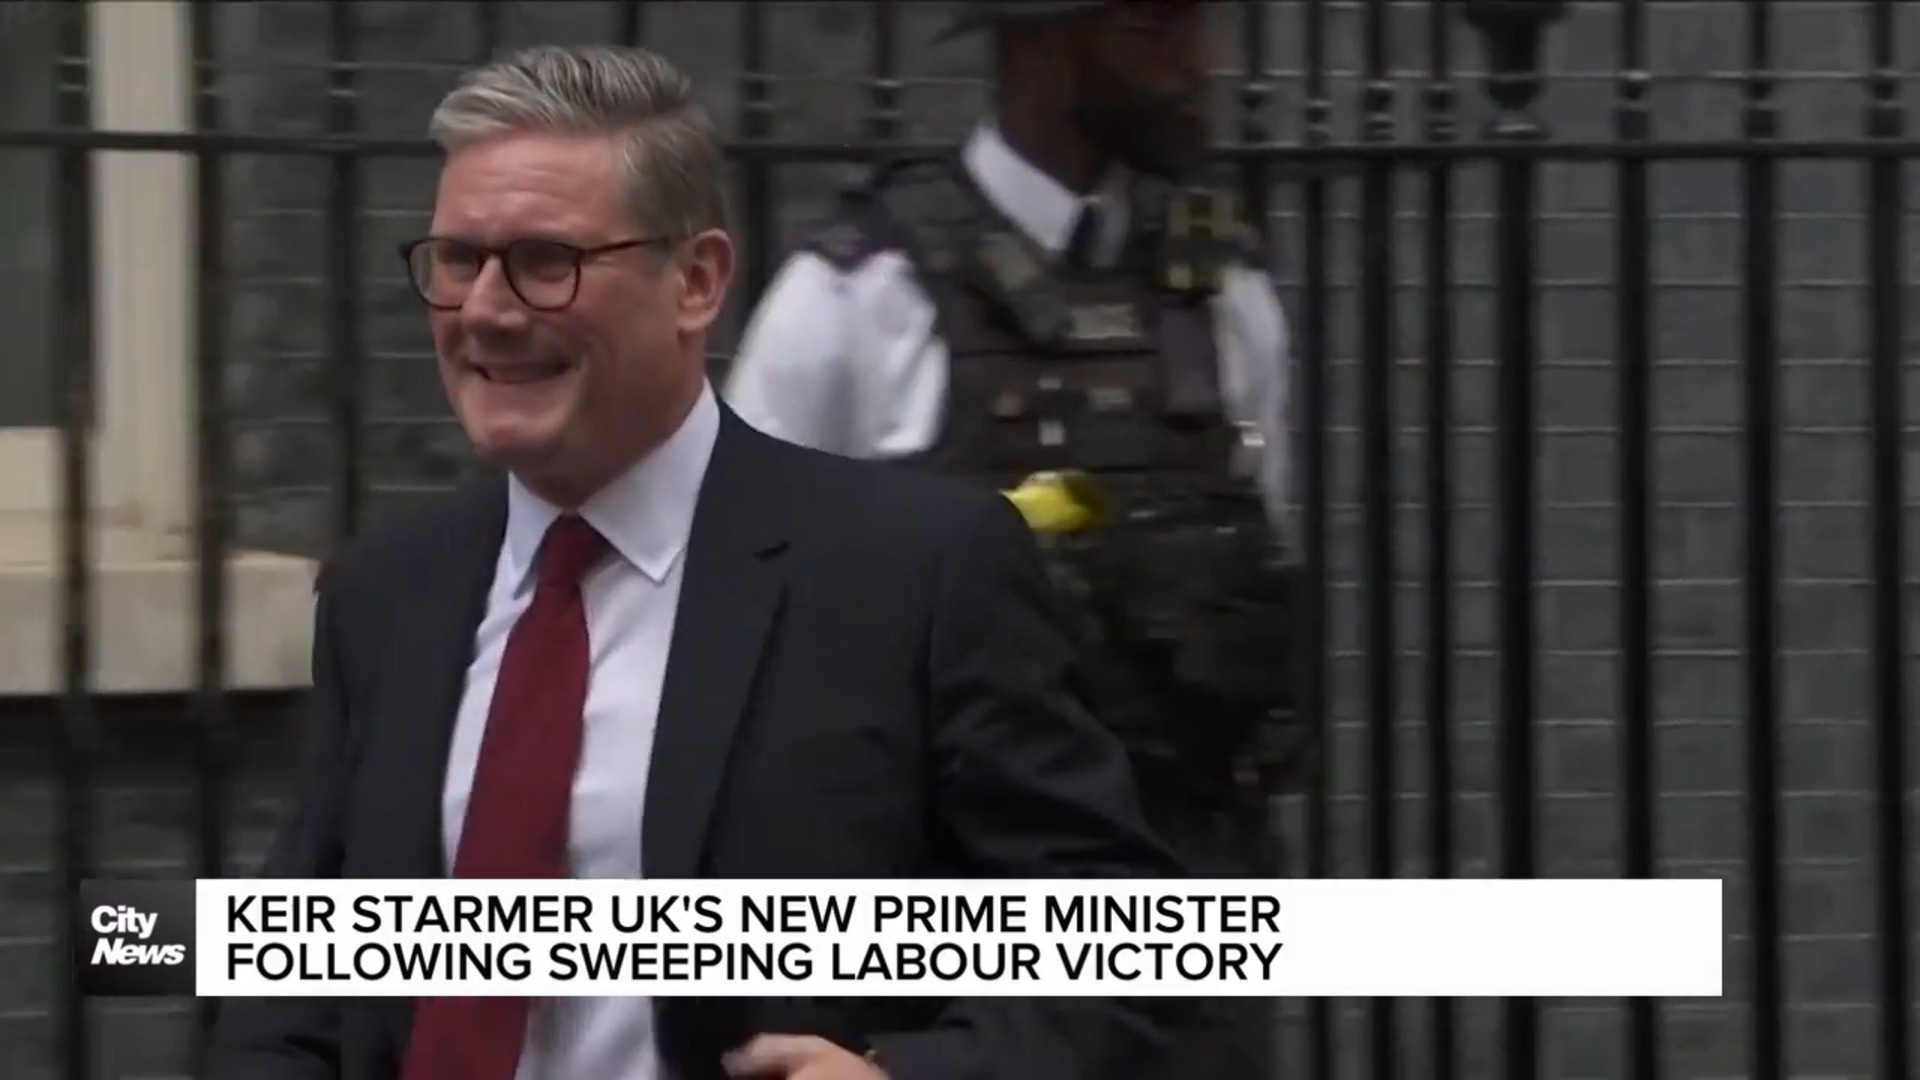 UK has new PM after Labour’s sweeping victory